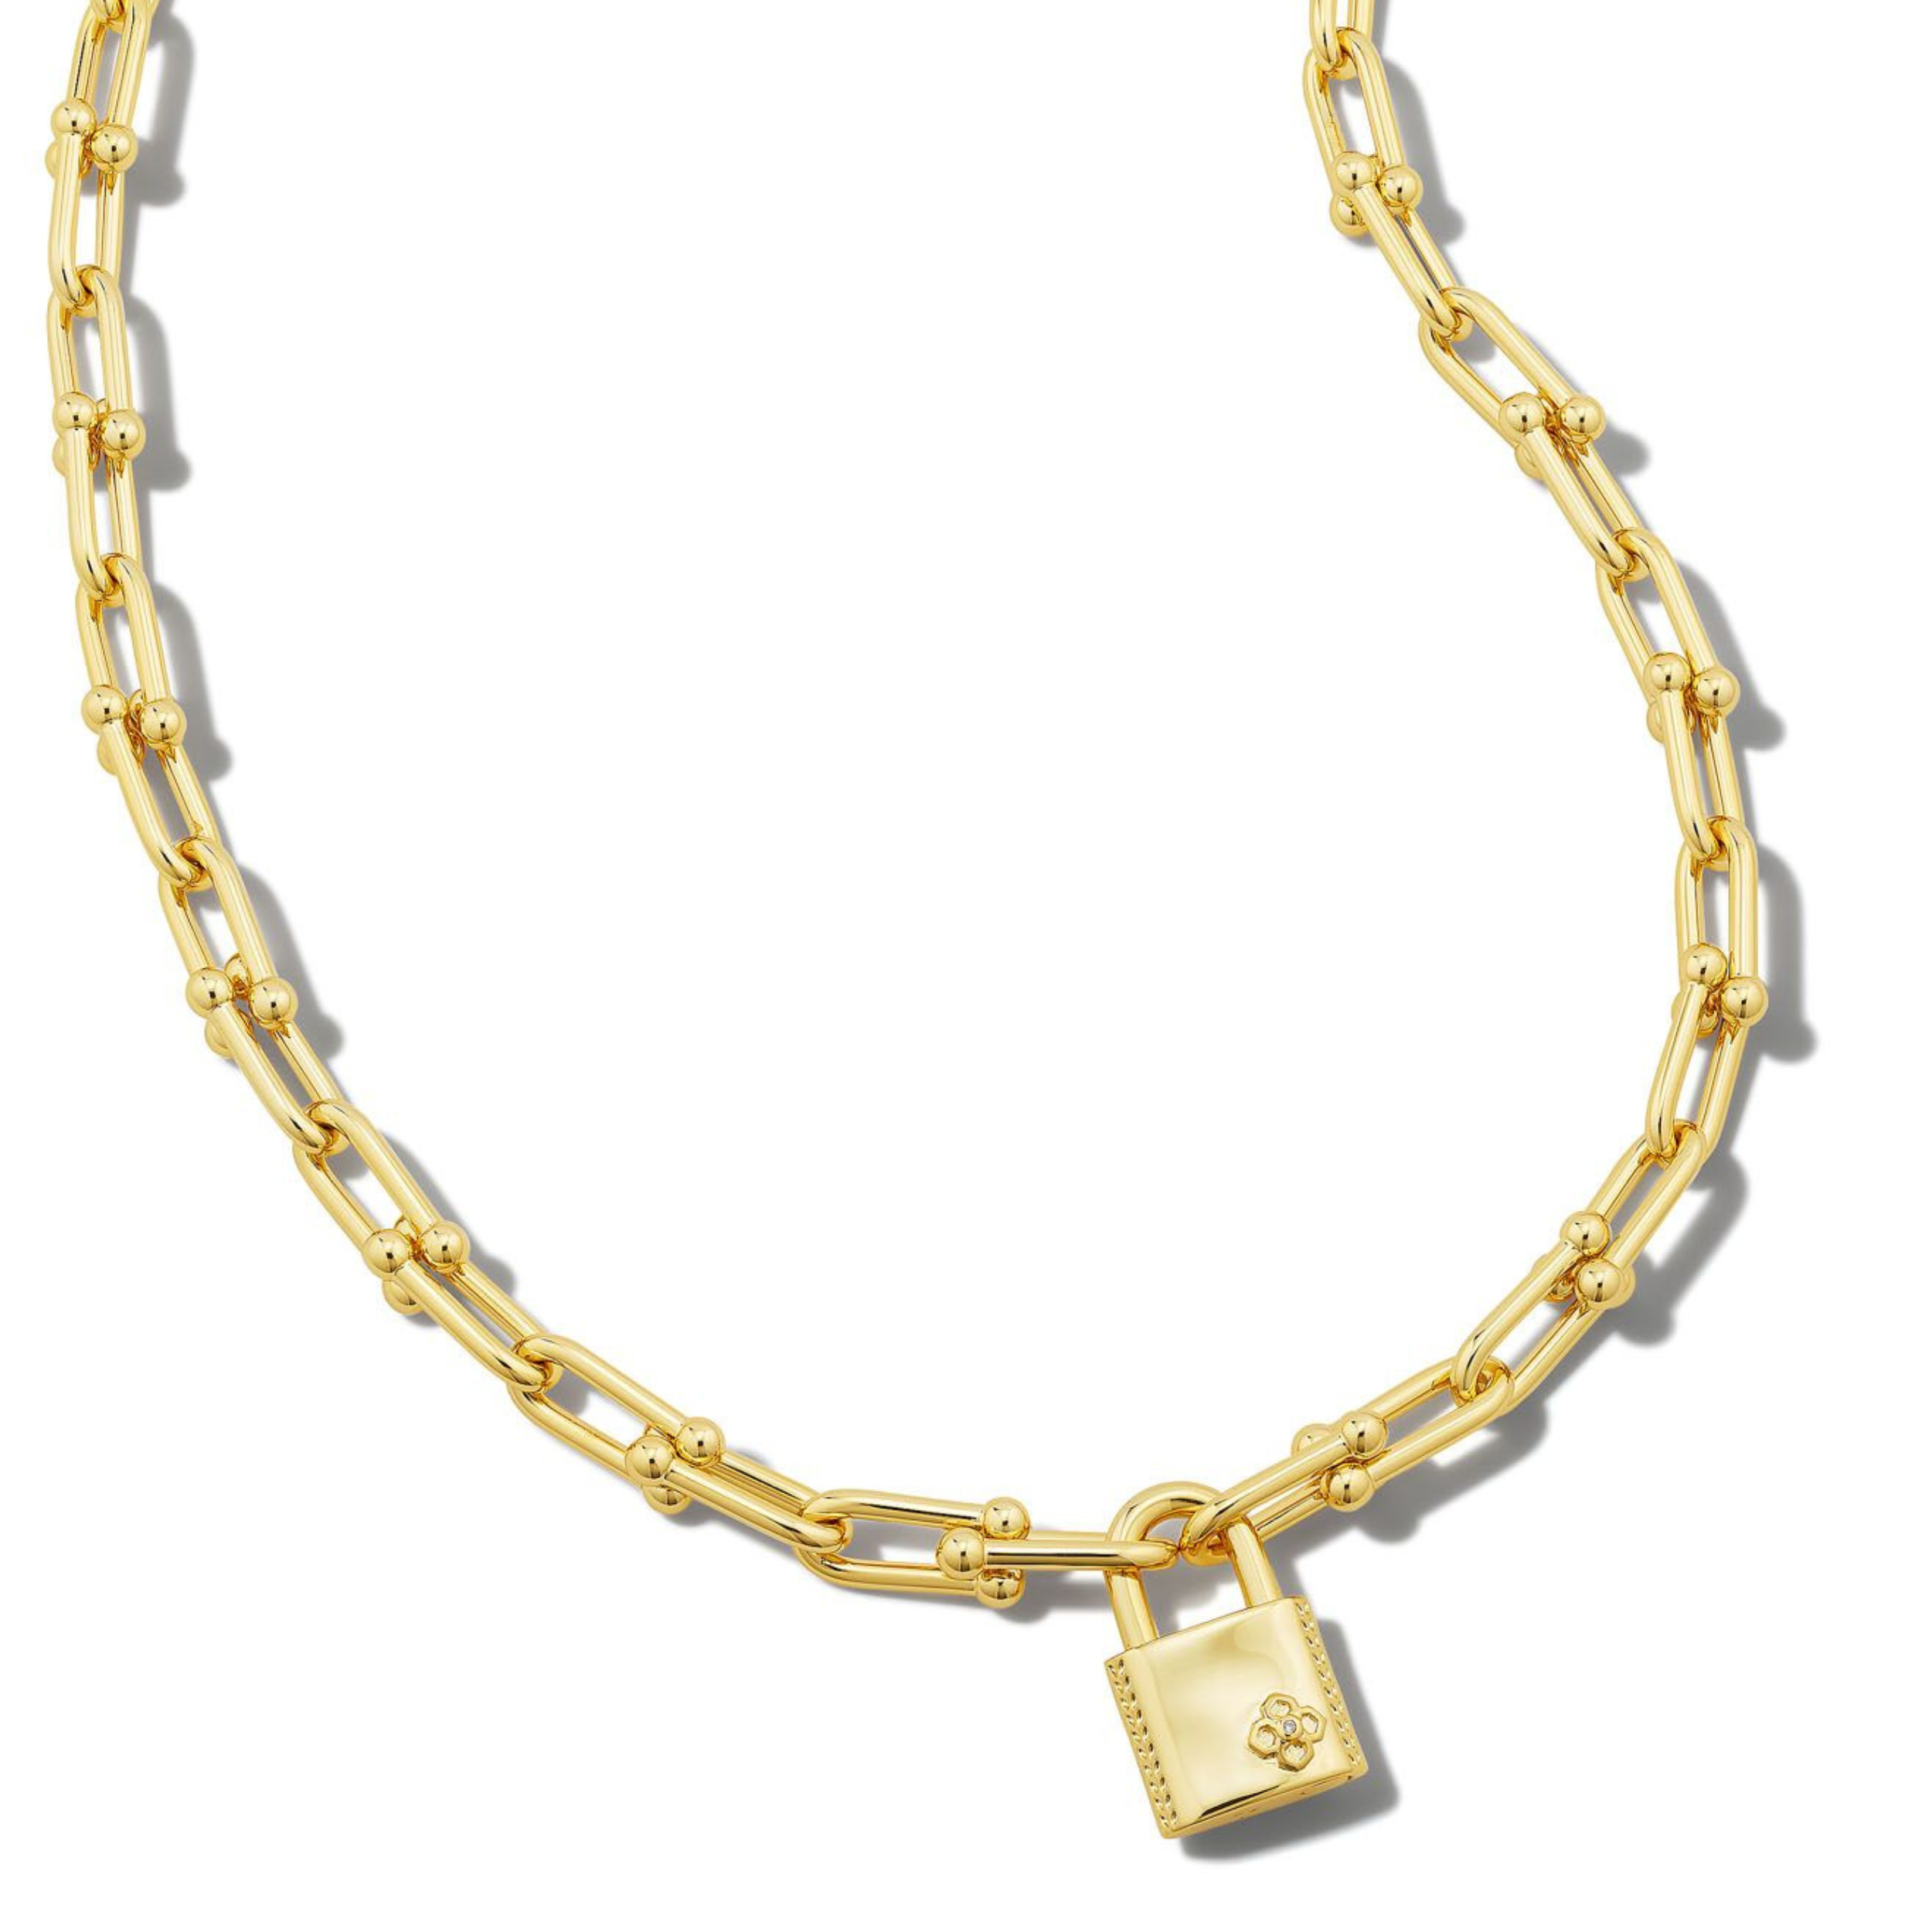 Kendra Scott | Jess Lock Chain Necklace in Gold - Giddy Up Glamour Boutique